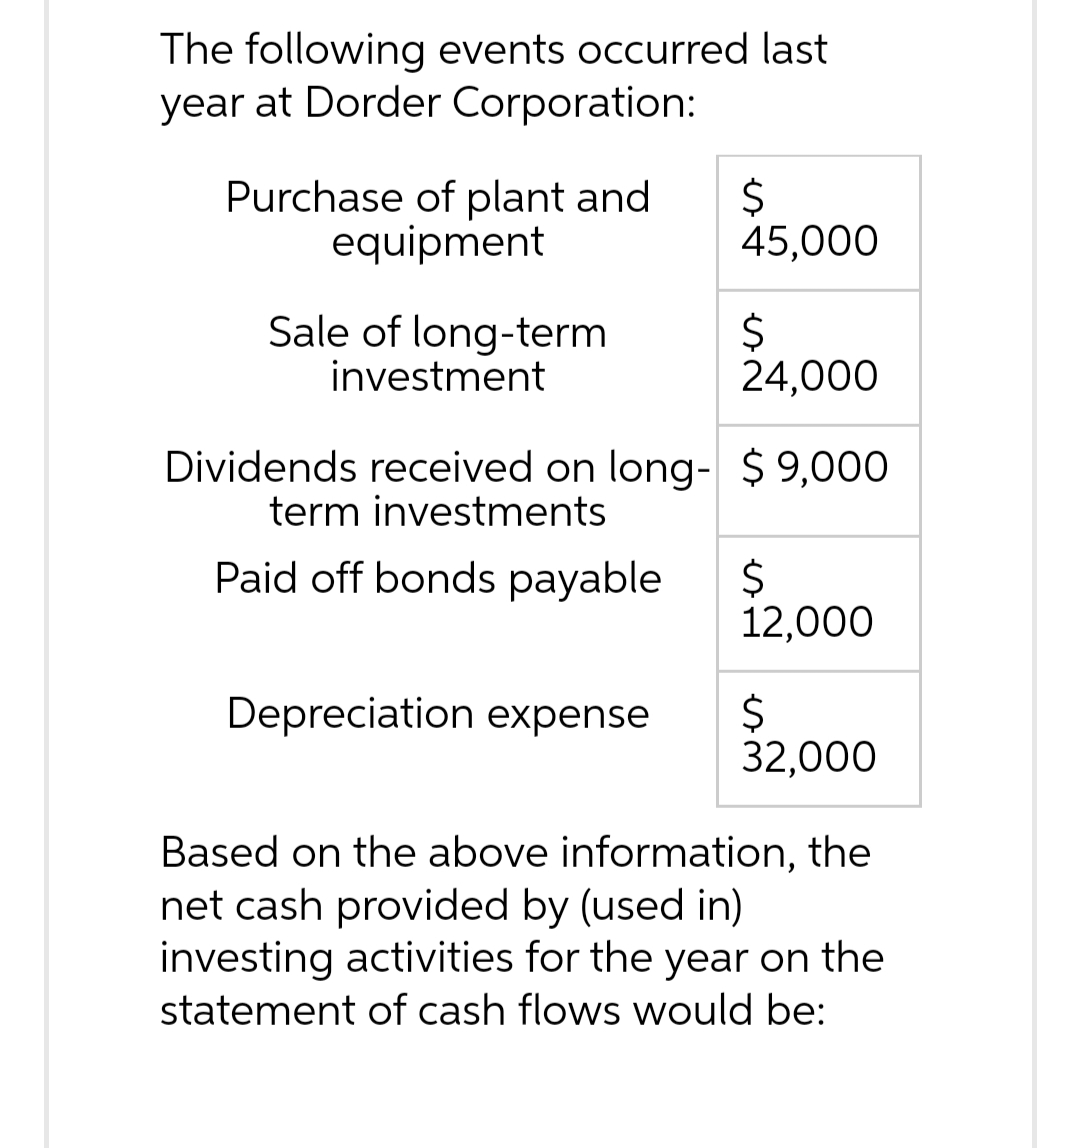 The following events occurred last
year at Dorder Corporation:
Purchase of plant and
equipment
Sale of long-term
investment
$
45,000
Depreciation expense
$
24,000
Dividends received on long- $ 9,000
term investments
Paid off bonds payable
$
12,000
$
32,000
Based on the above information, the
net cash provided by (used in)
investing activities for the year on the
statement of cash flows would be: